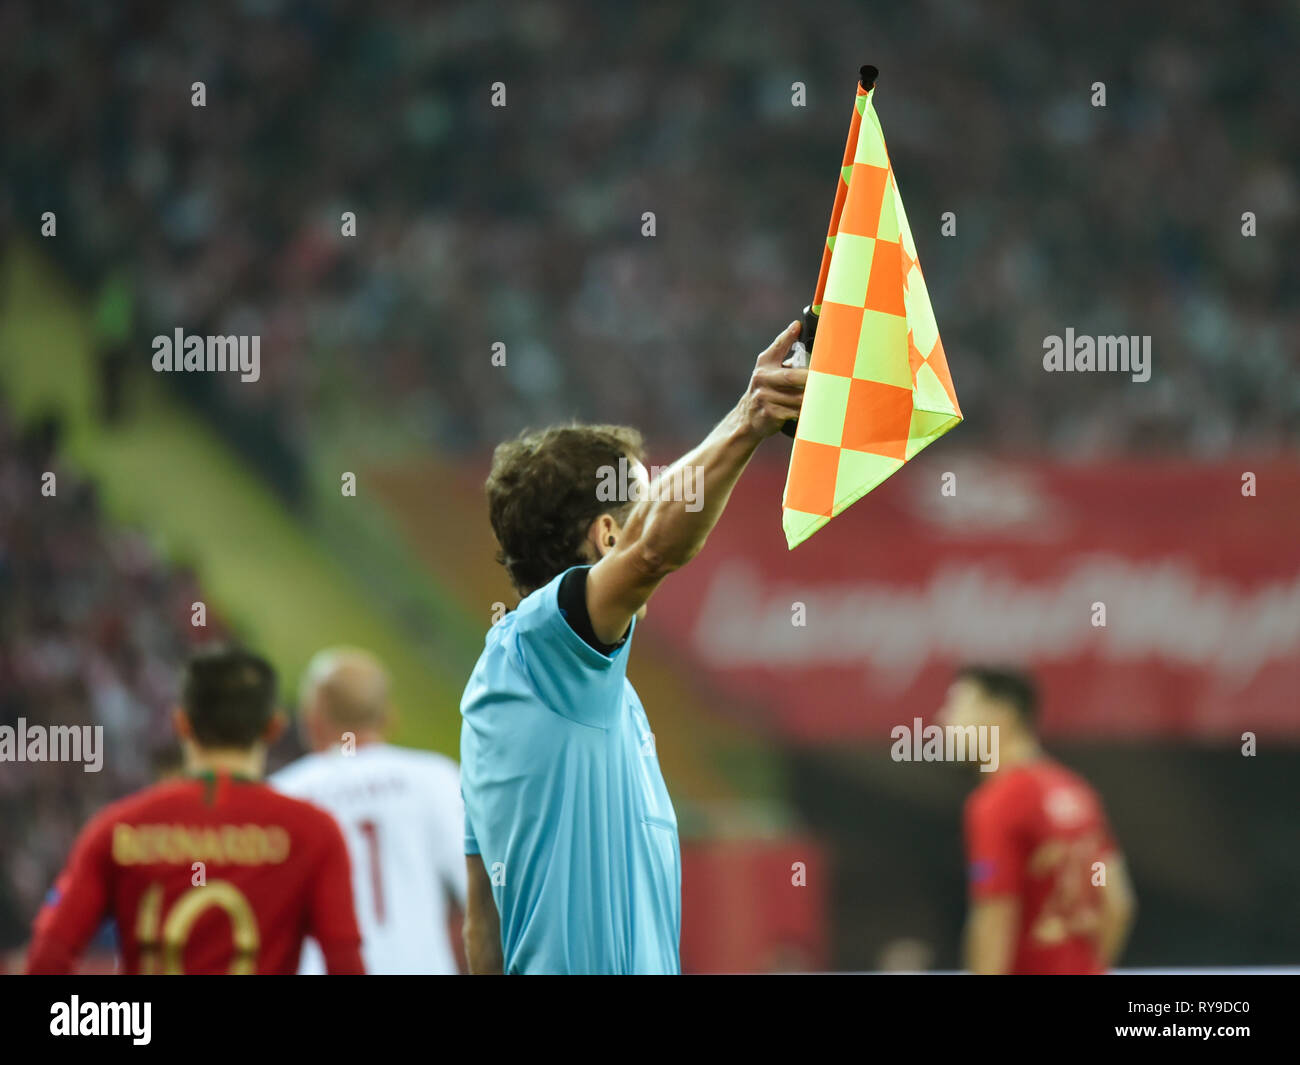 Assistant of football referee with raised flag. Stock Photo